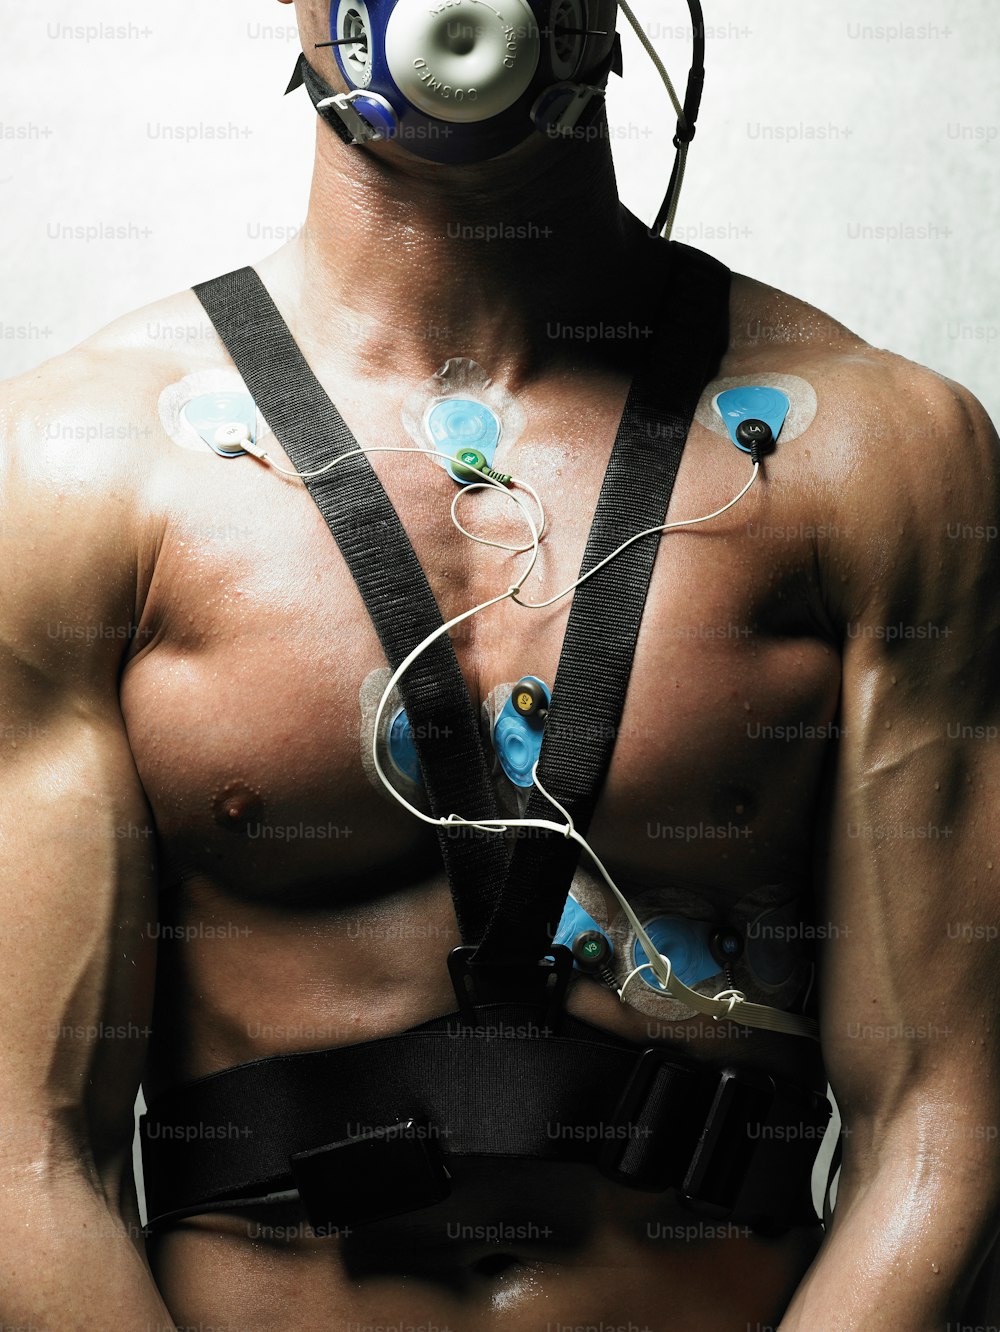 a shirtless man wearing a gas mask and harness